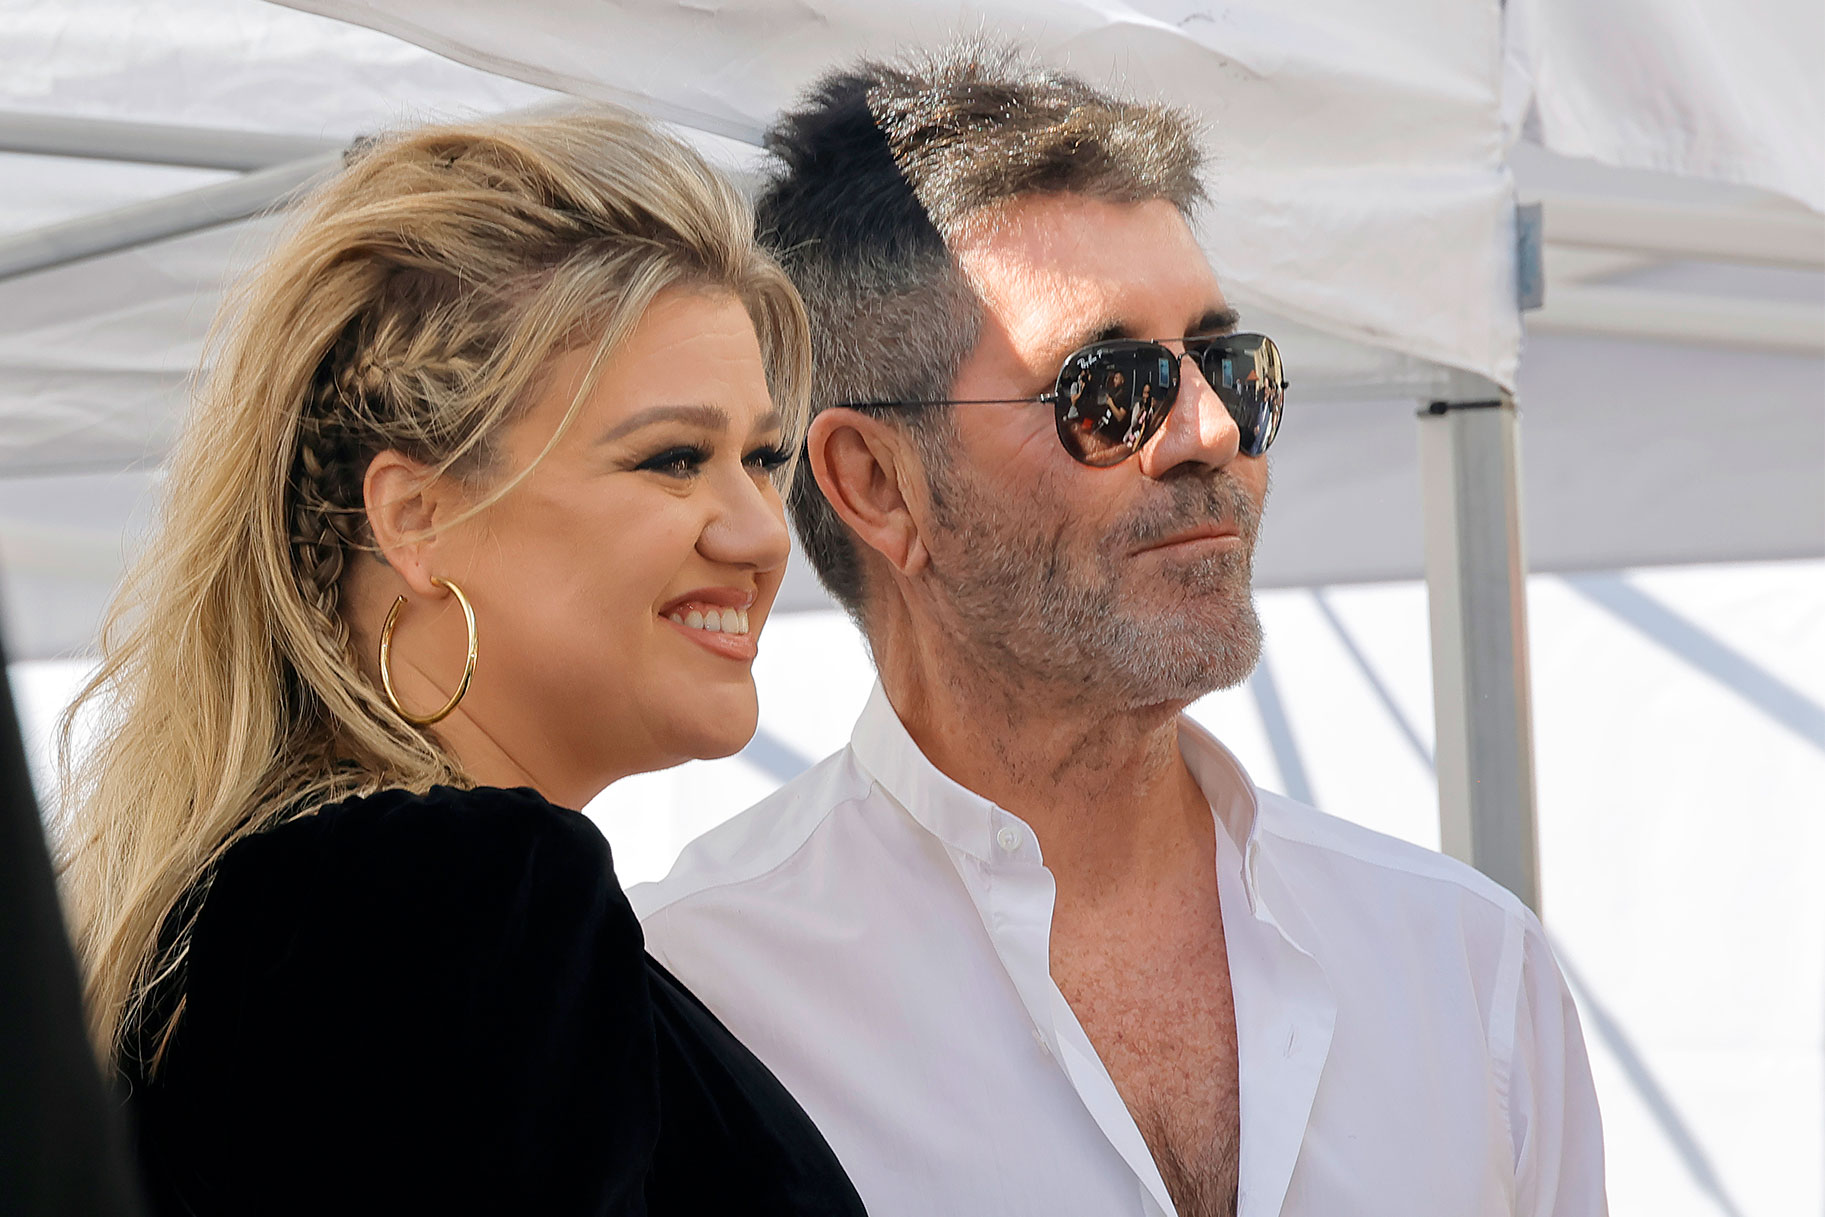 Kelly Clarkson posed and smiling with Simon Cowell